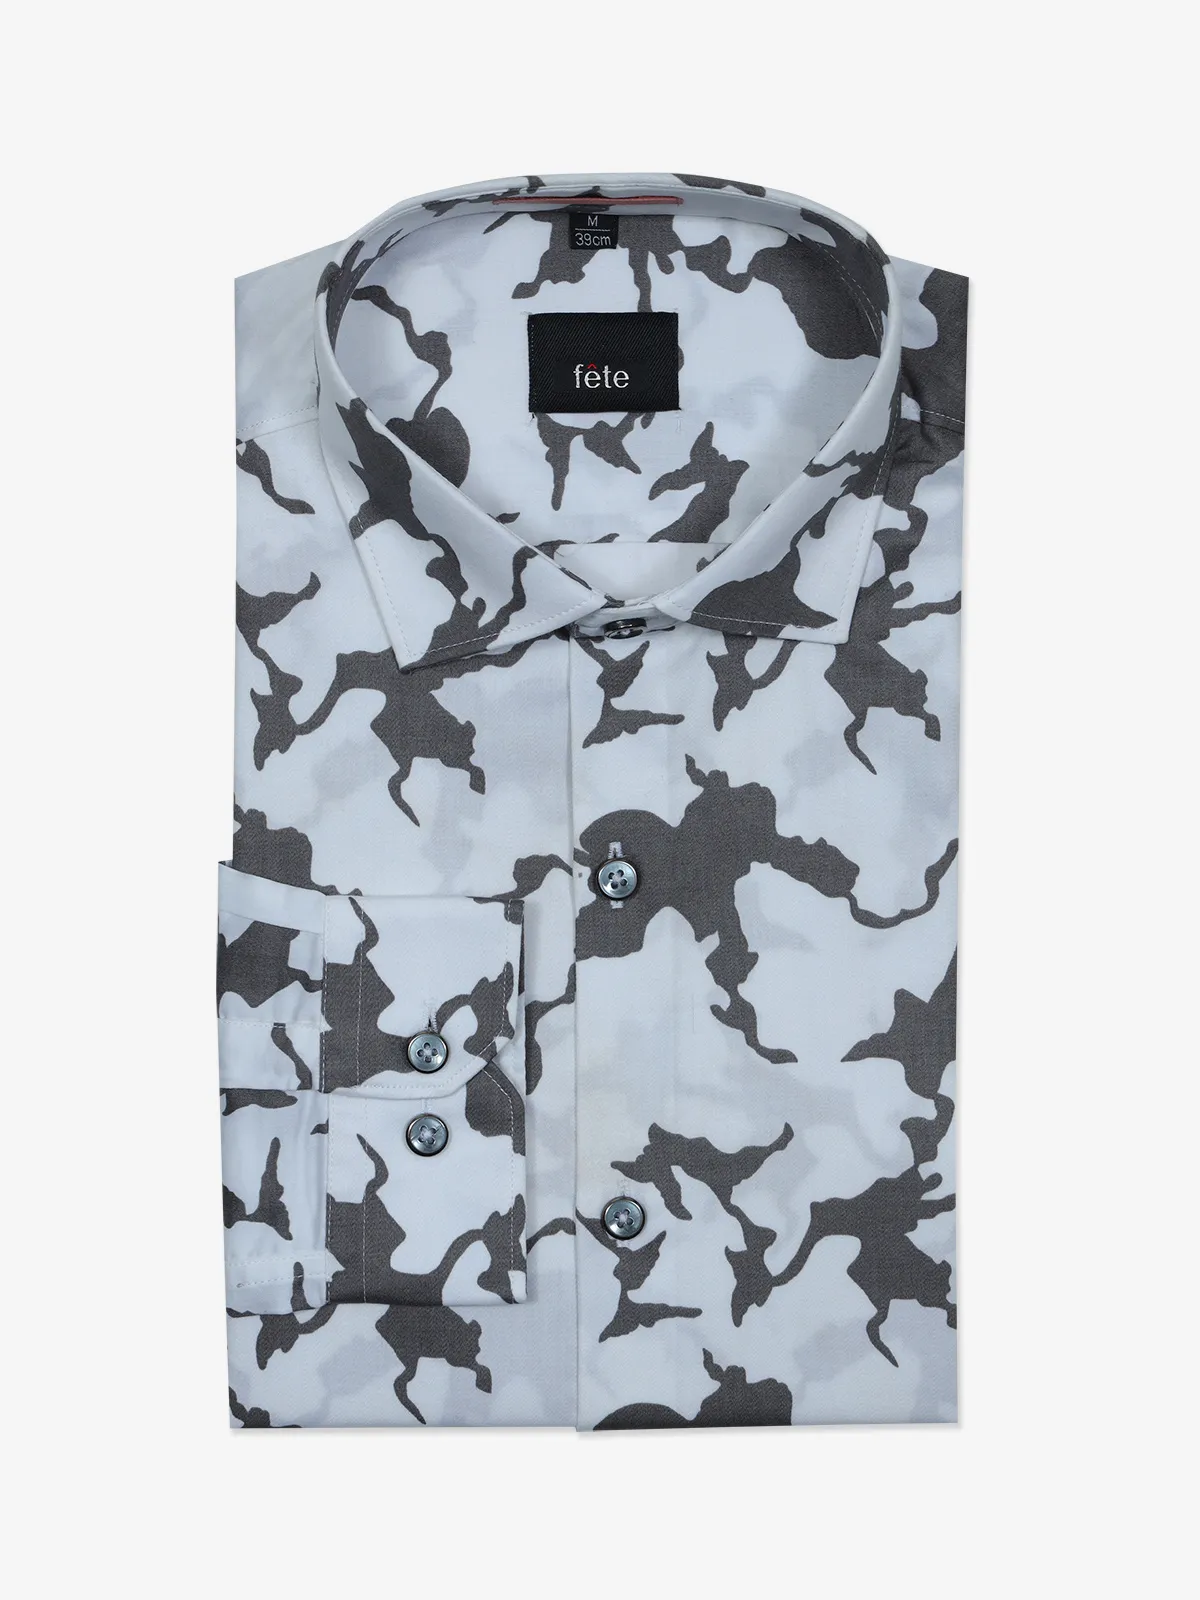 FETE white and grey printed shirt